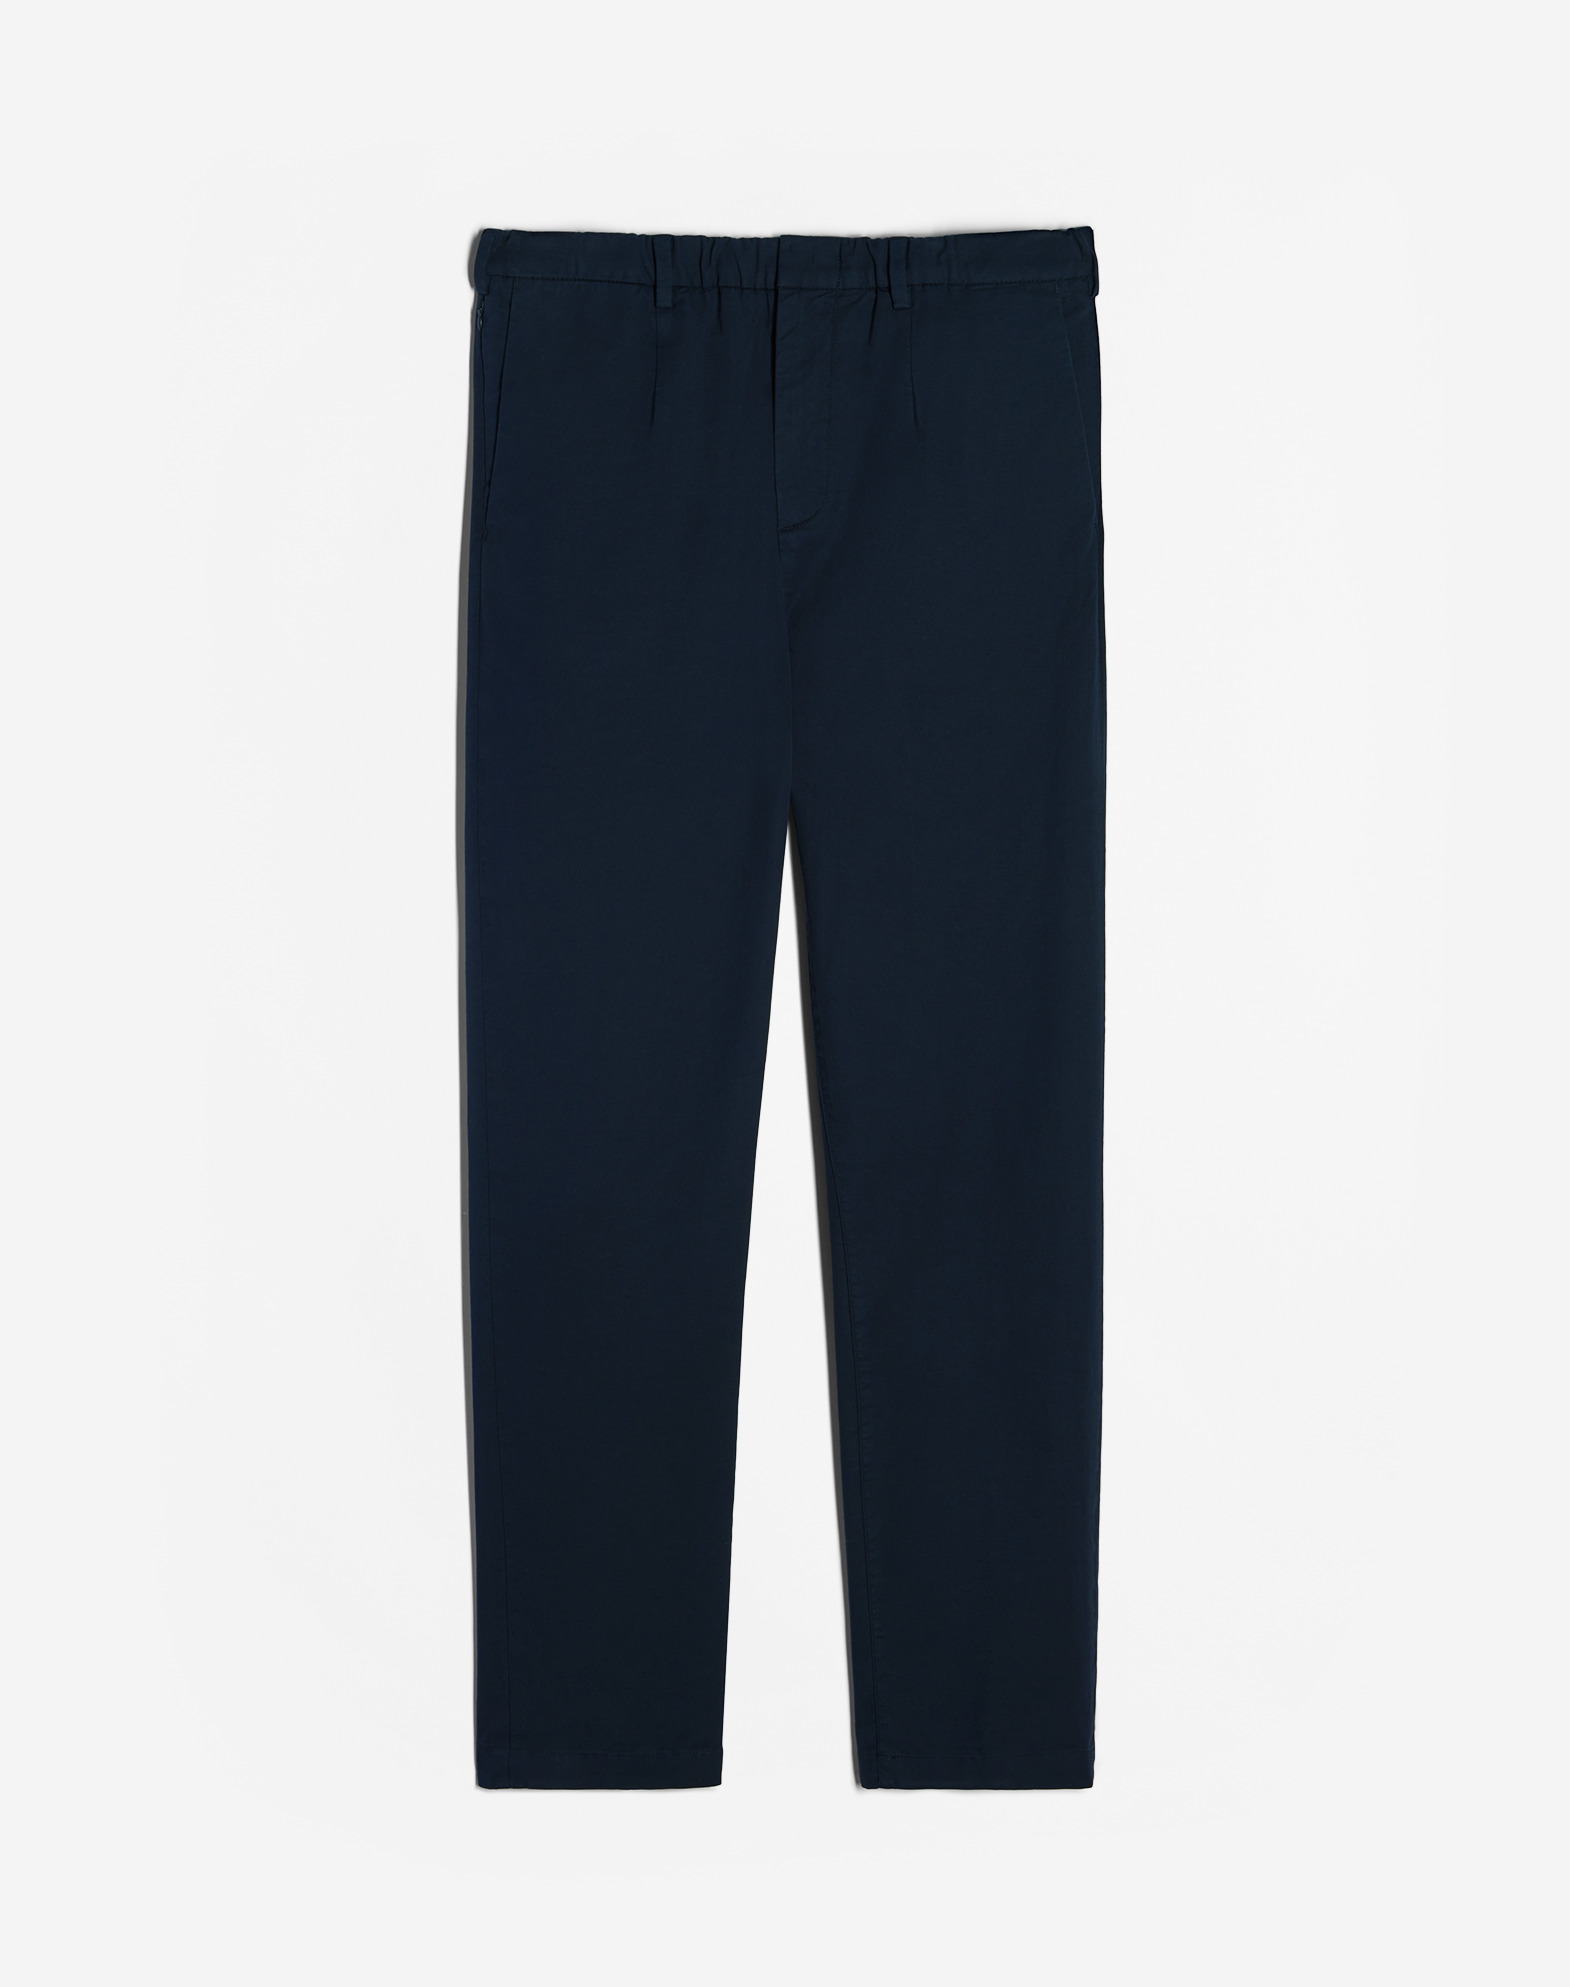 Dunhill Cotton Linen Sports Pant In Black